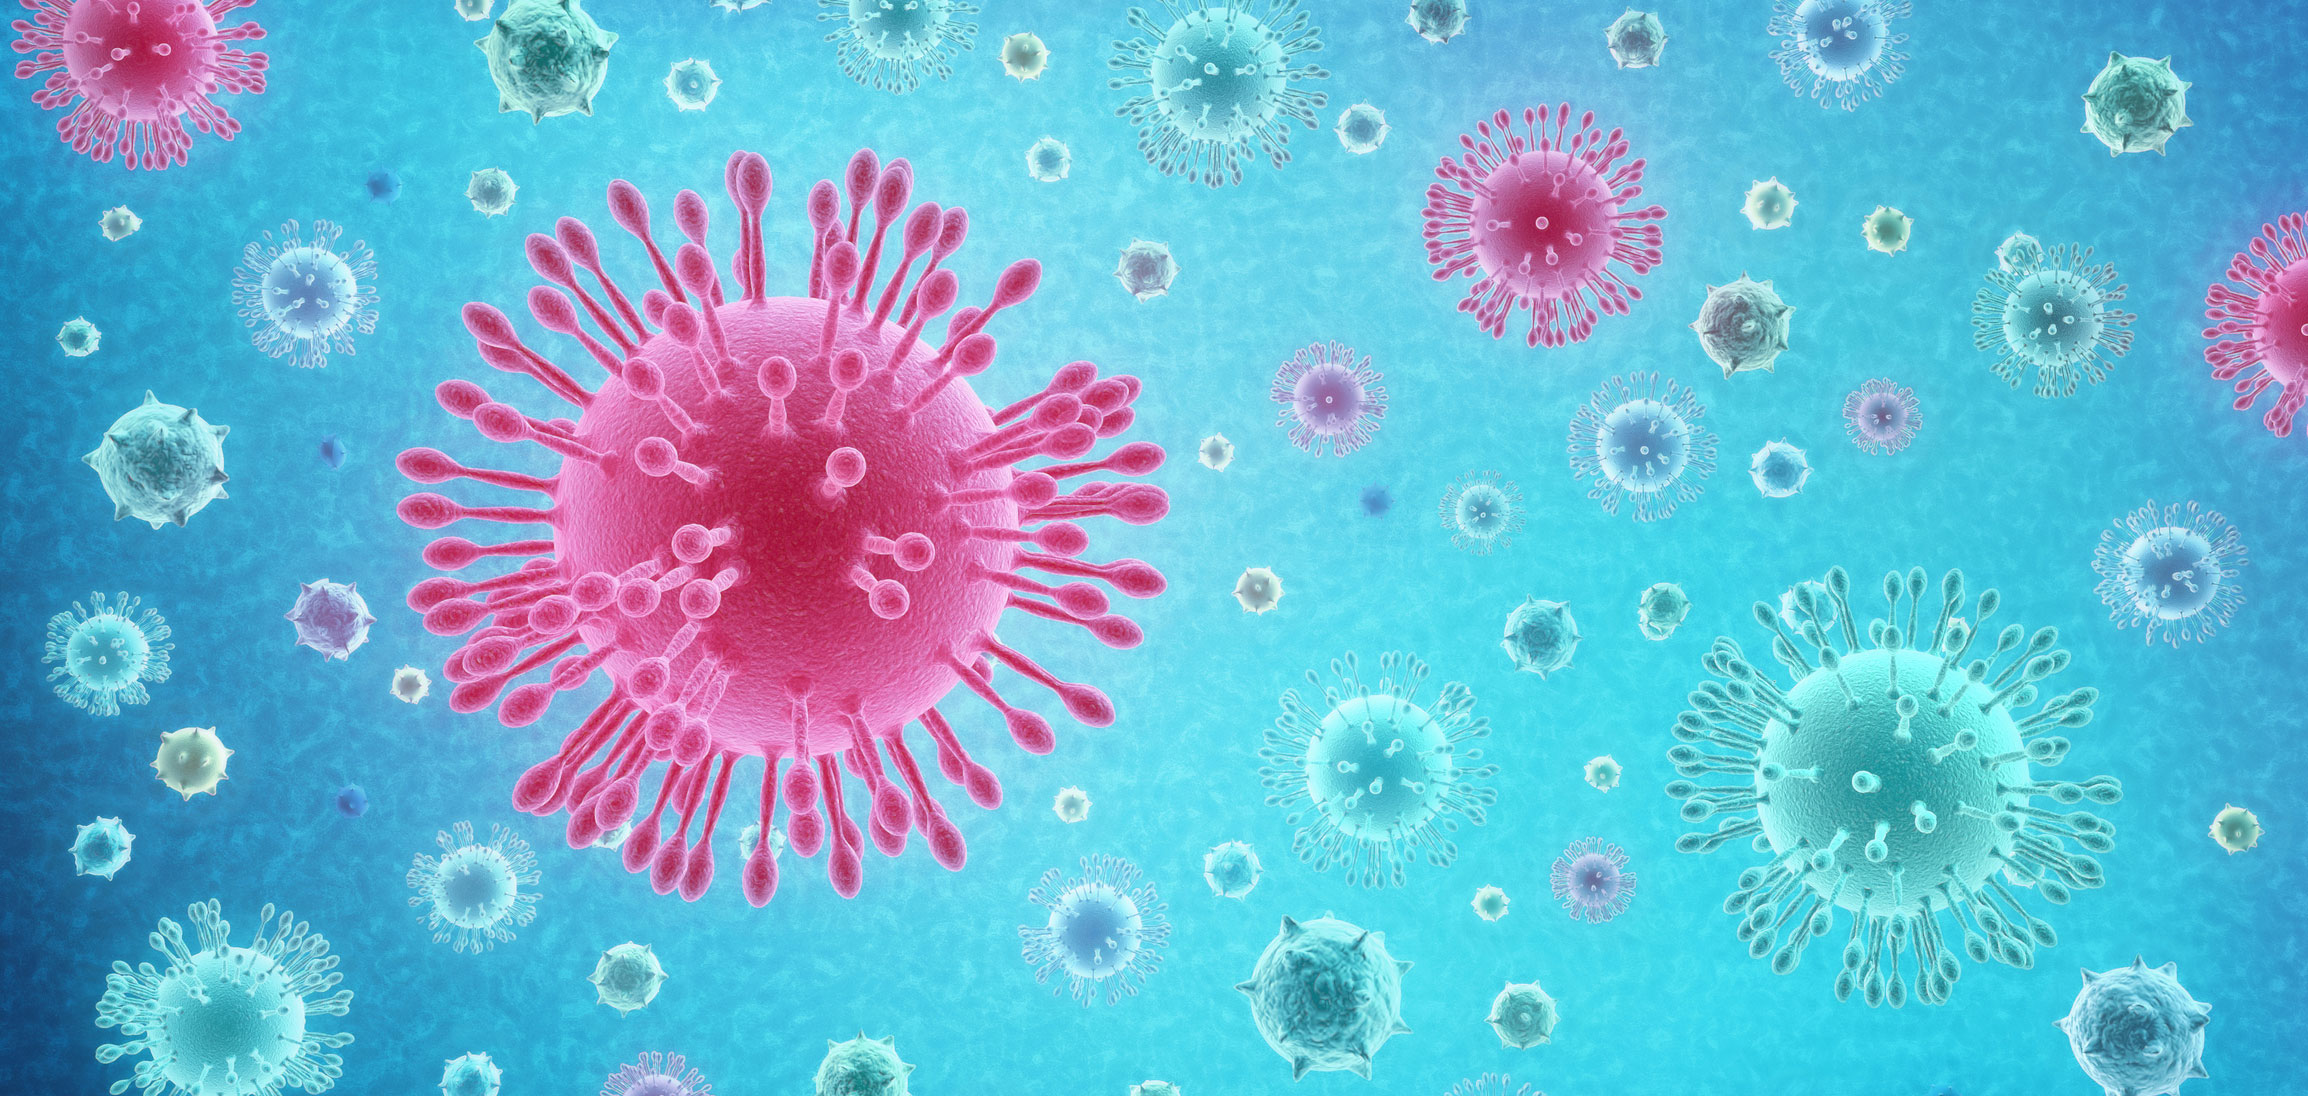 A conceptual illustration of the coronavirus as if it were observed from a microscope is seen.